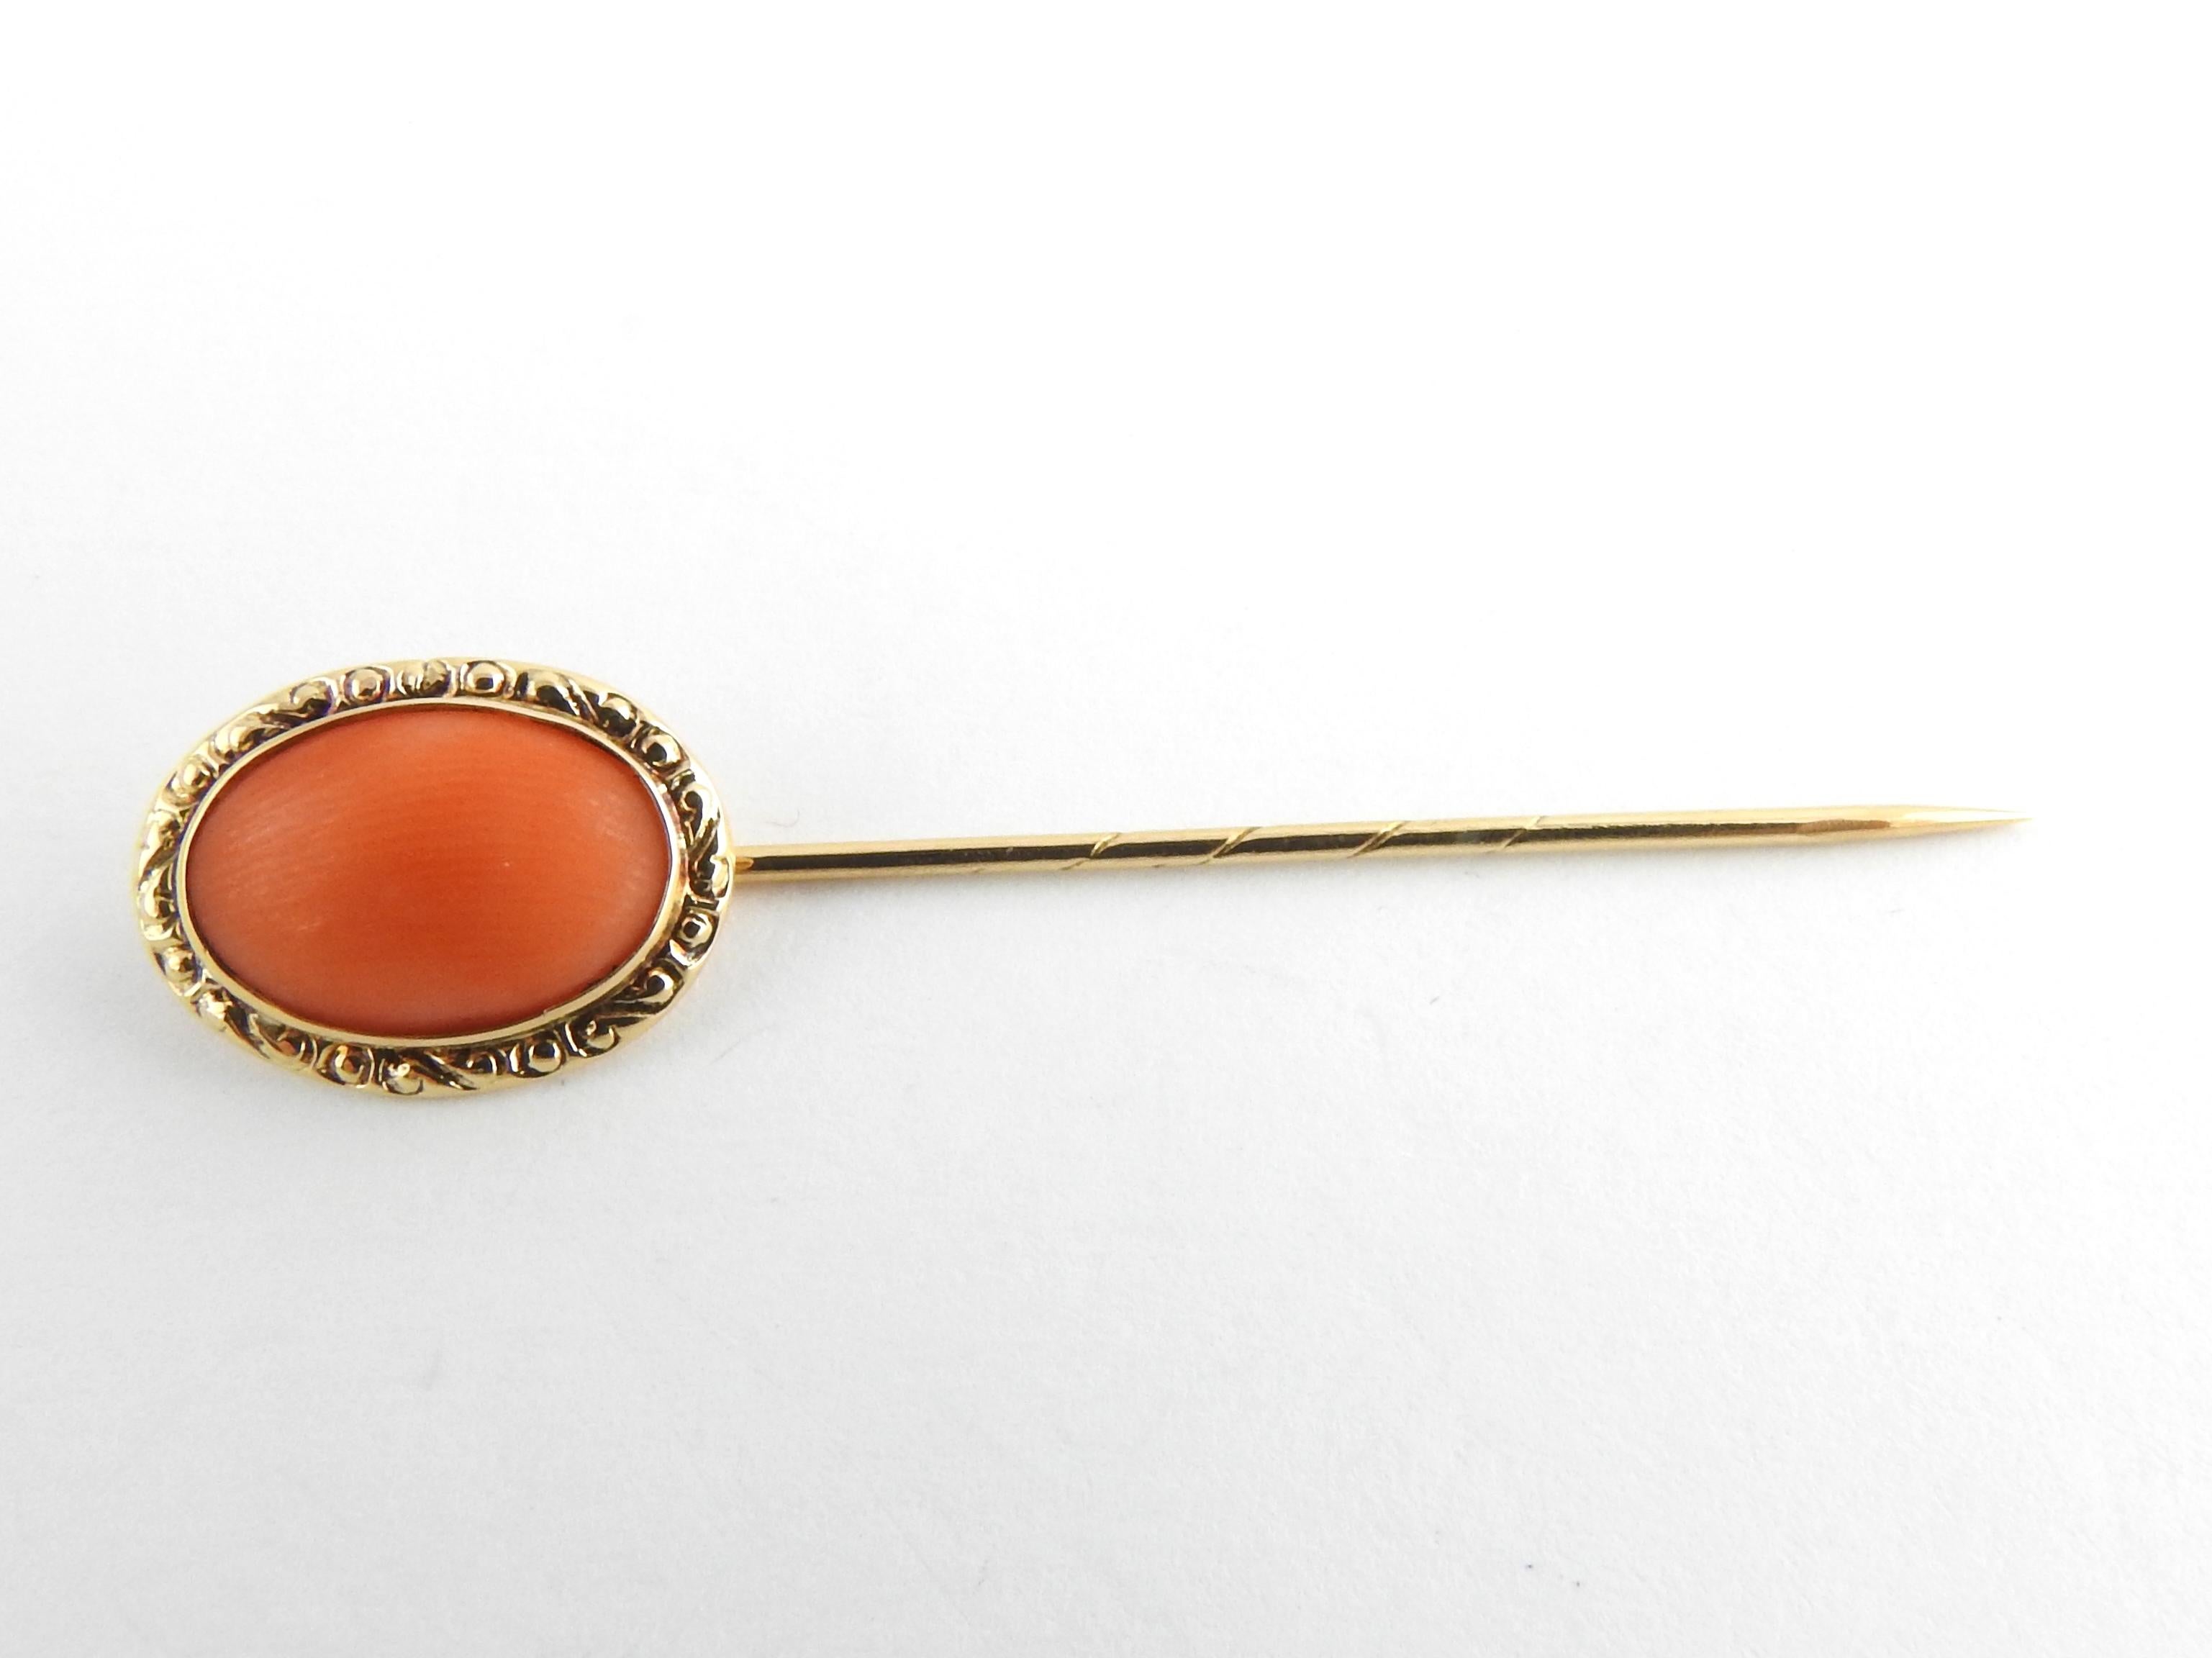 Vintage 14 Karat Yellow Gold and Coral Stick Pin

This lovely stick pin features one coral gemstone 13 mm x 9 mm set in beautifully detailed 14K yellow gold.

Size: 53 mm x 12 mm

Weight: 1.0 dwt. / 1.7 gr.

Acid tested for 14K gold.

Very good